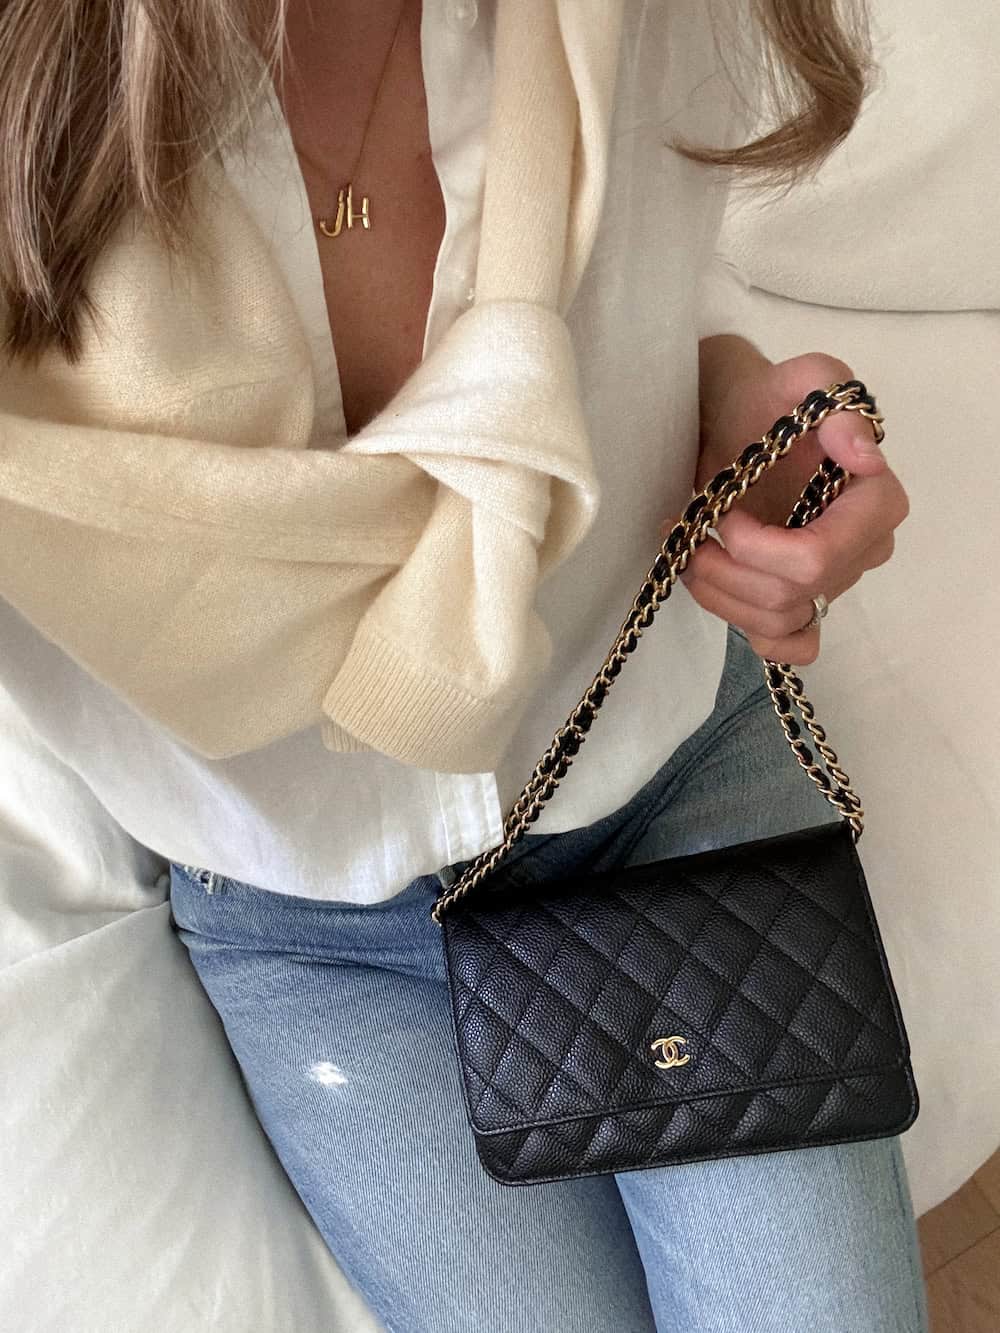 Woman holding a black Chanel wallet on chain wearing a white button up shirt, cream sweater, and blue jeans